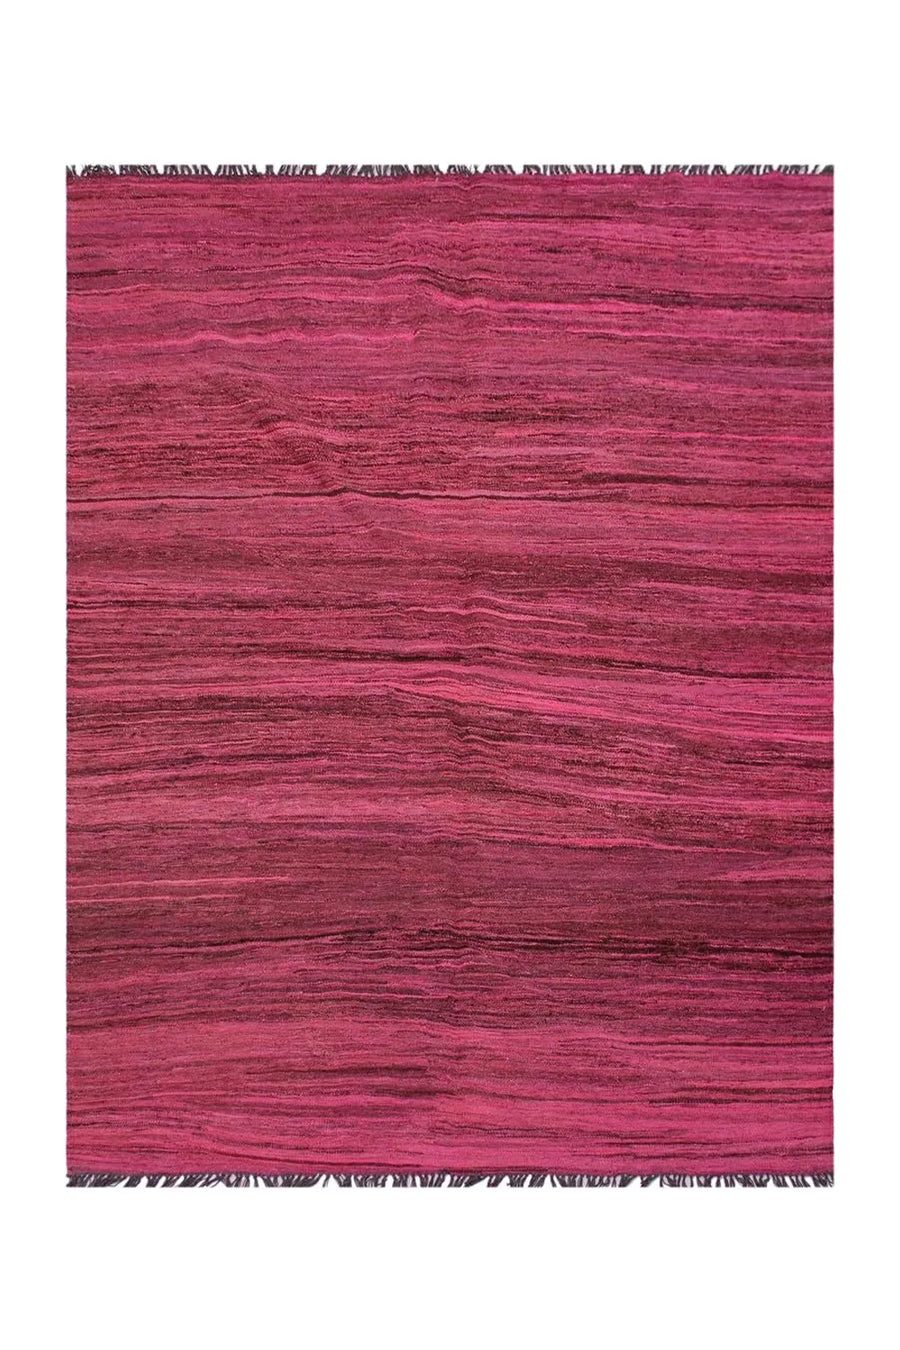 vibrant pink flatweave Kilim rug, hand-woven and perfect for contemporary homes